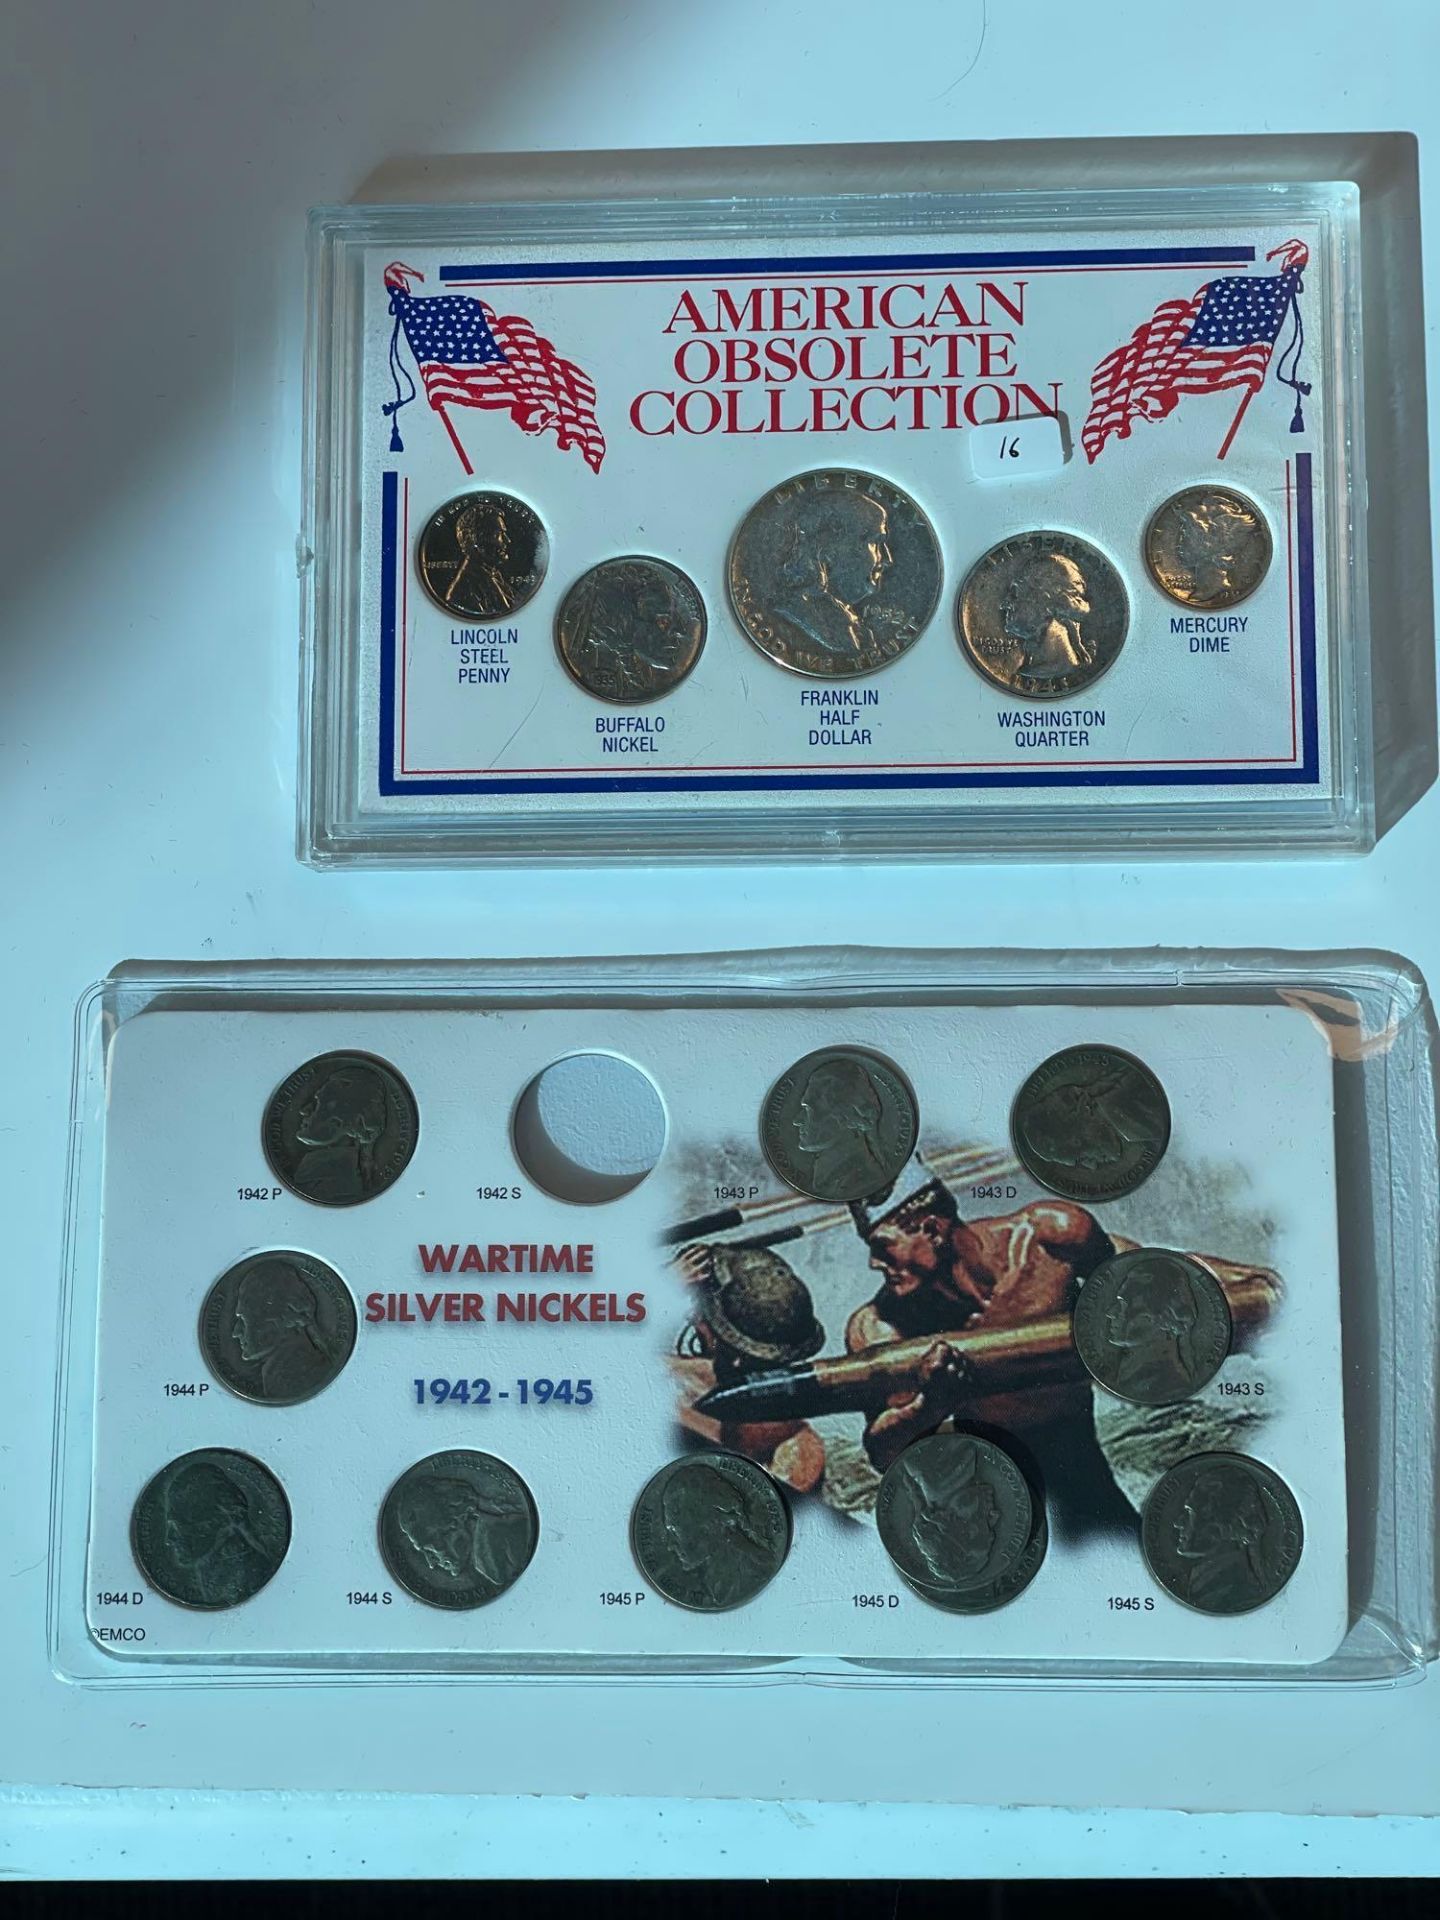 American Obsolete Collection, with WWIl Silver Nickel Set